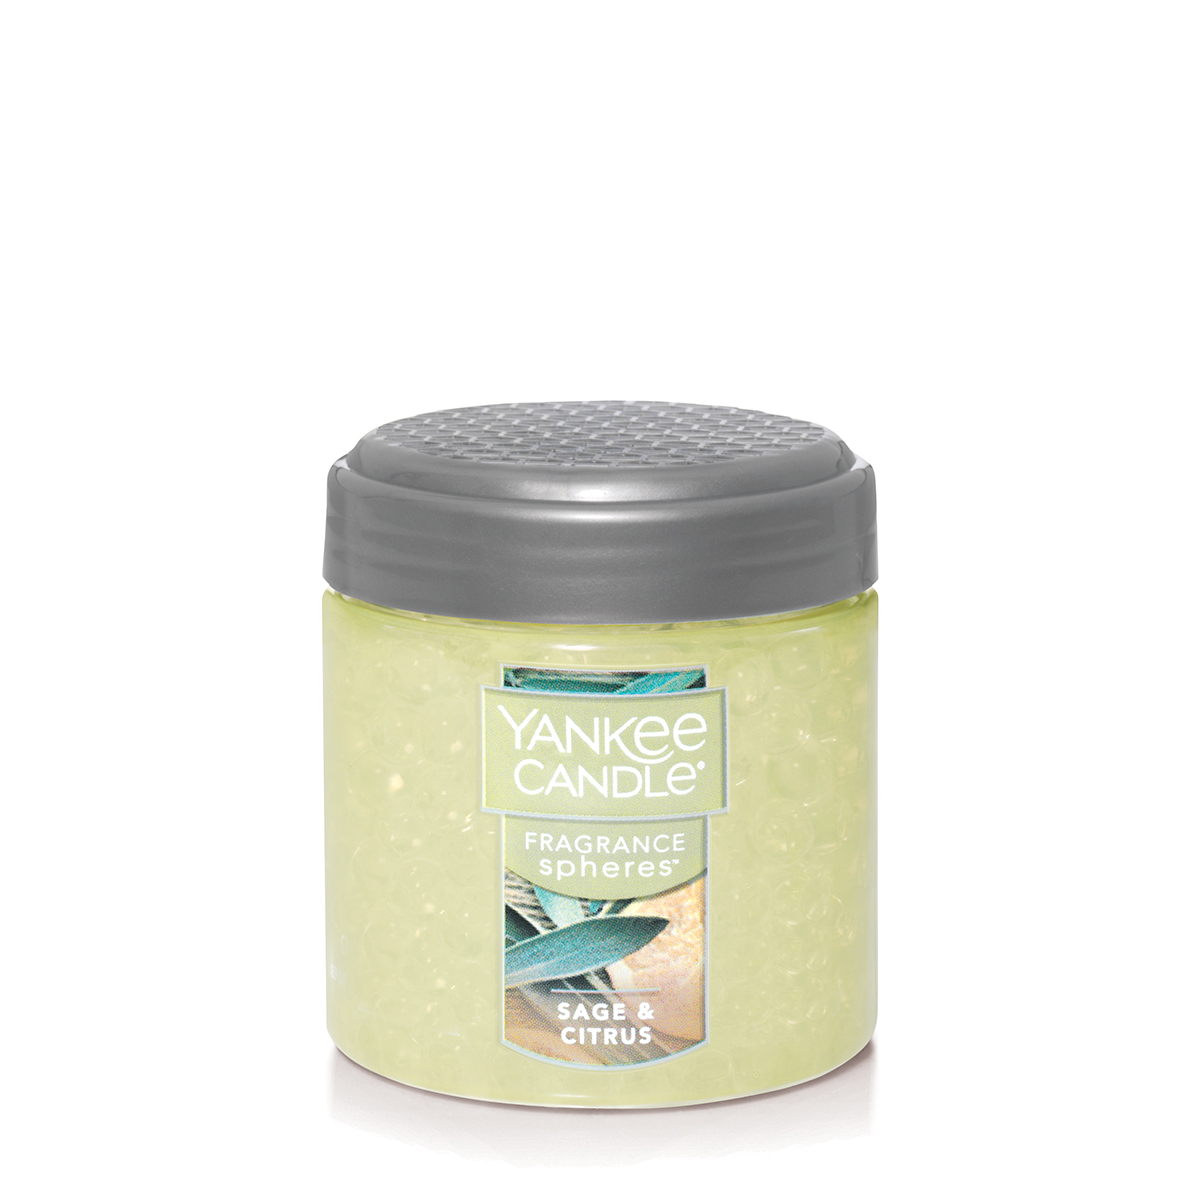 Yankee Candle(R) Sage & Citrus Scent Beads